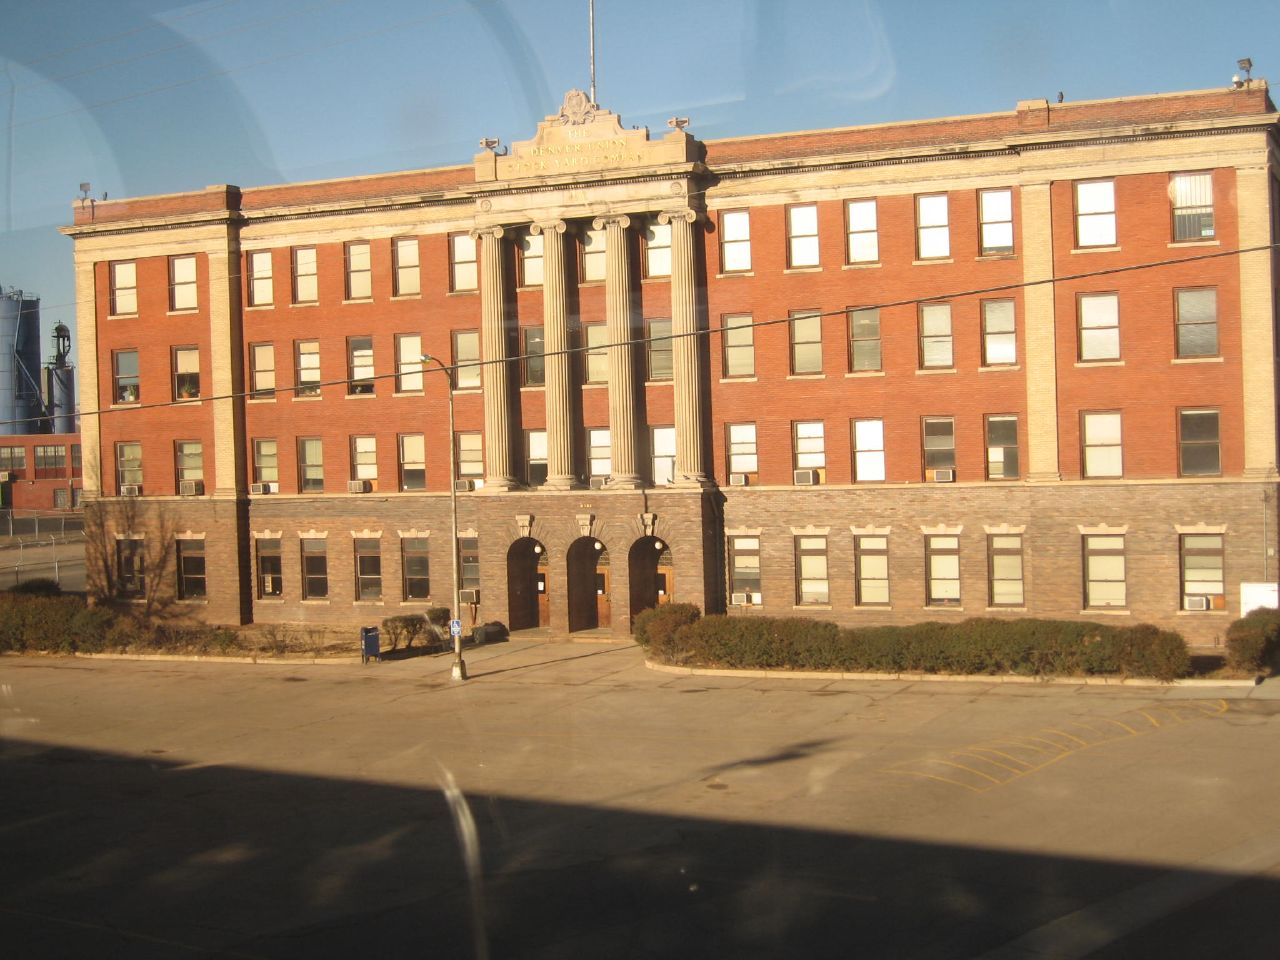 a large building with windows and doors sits empty